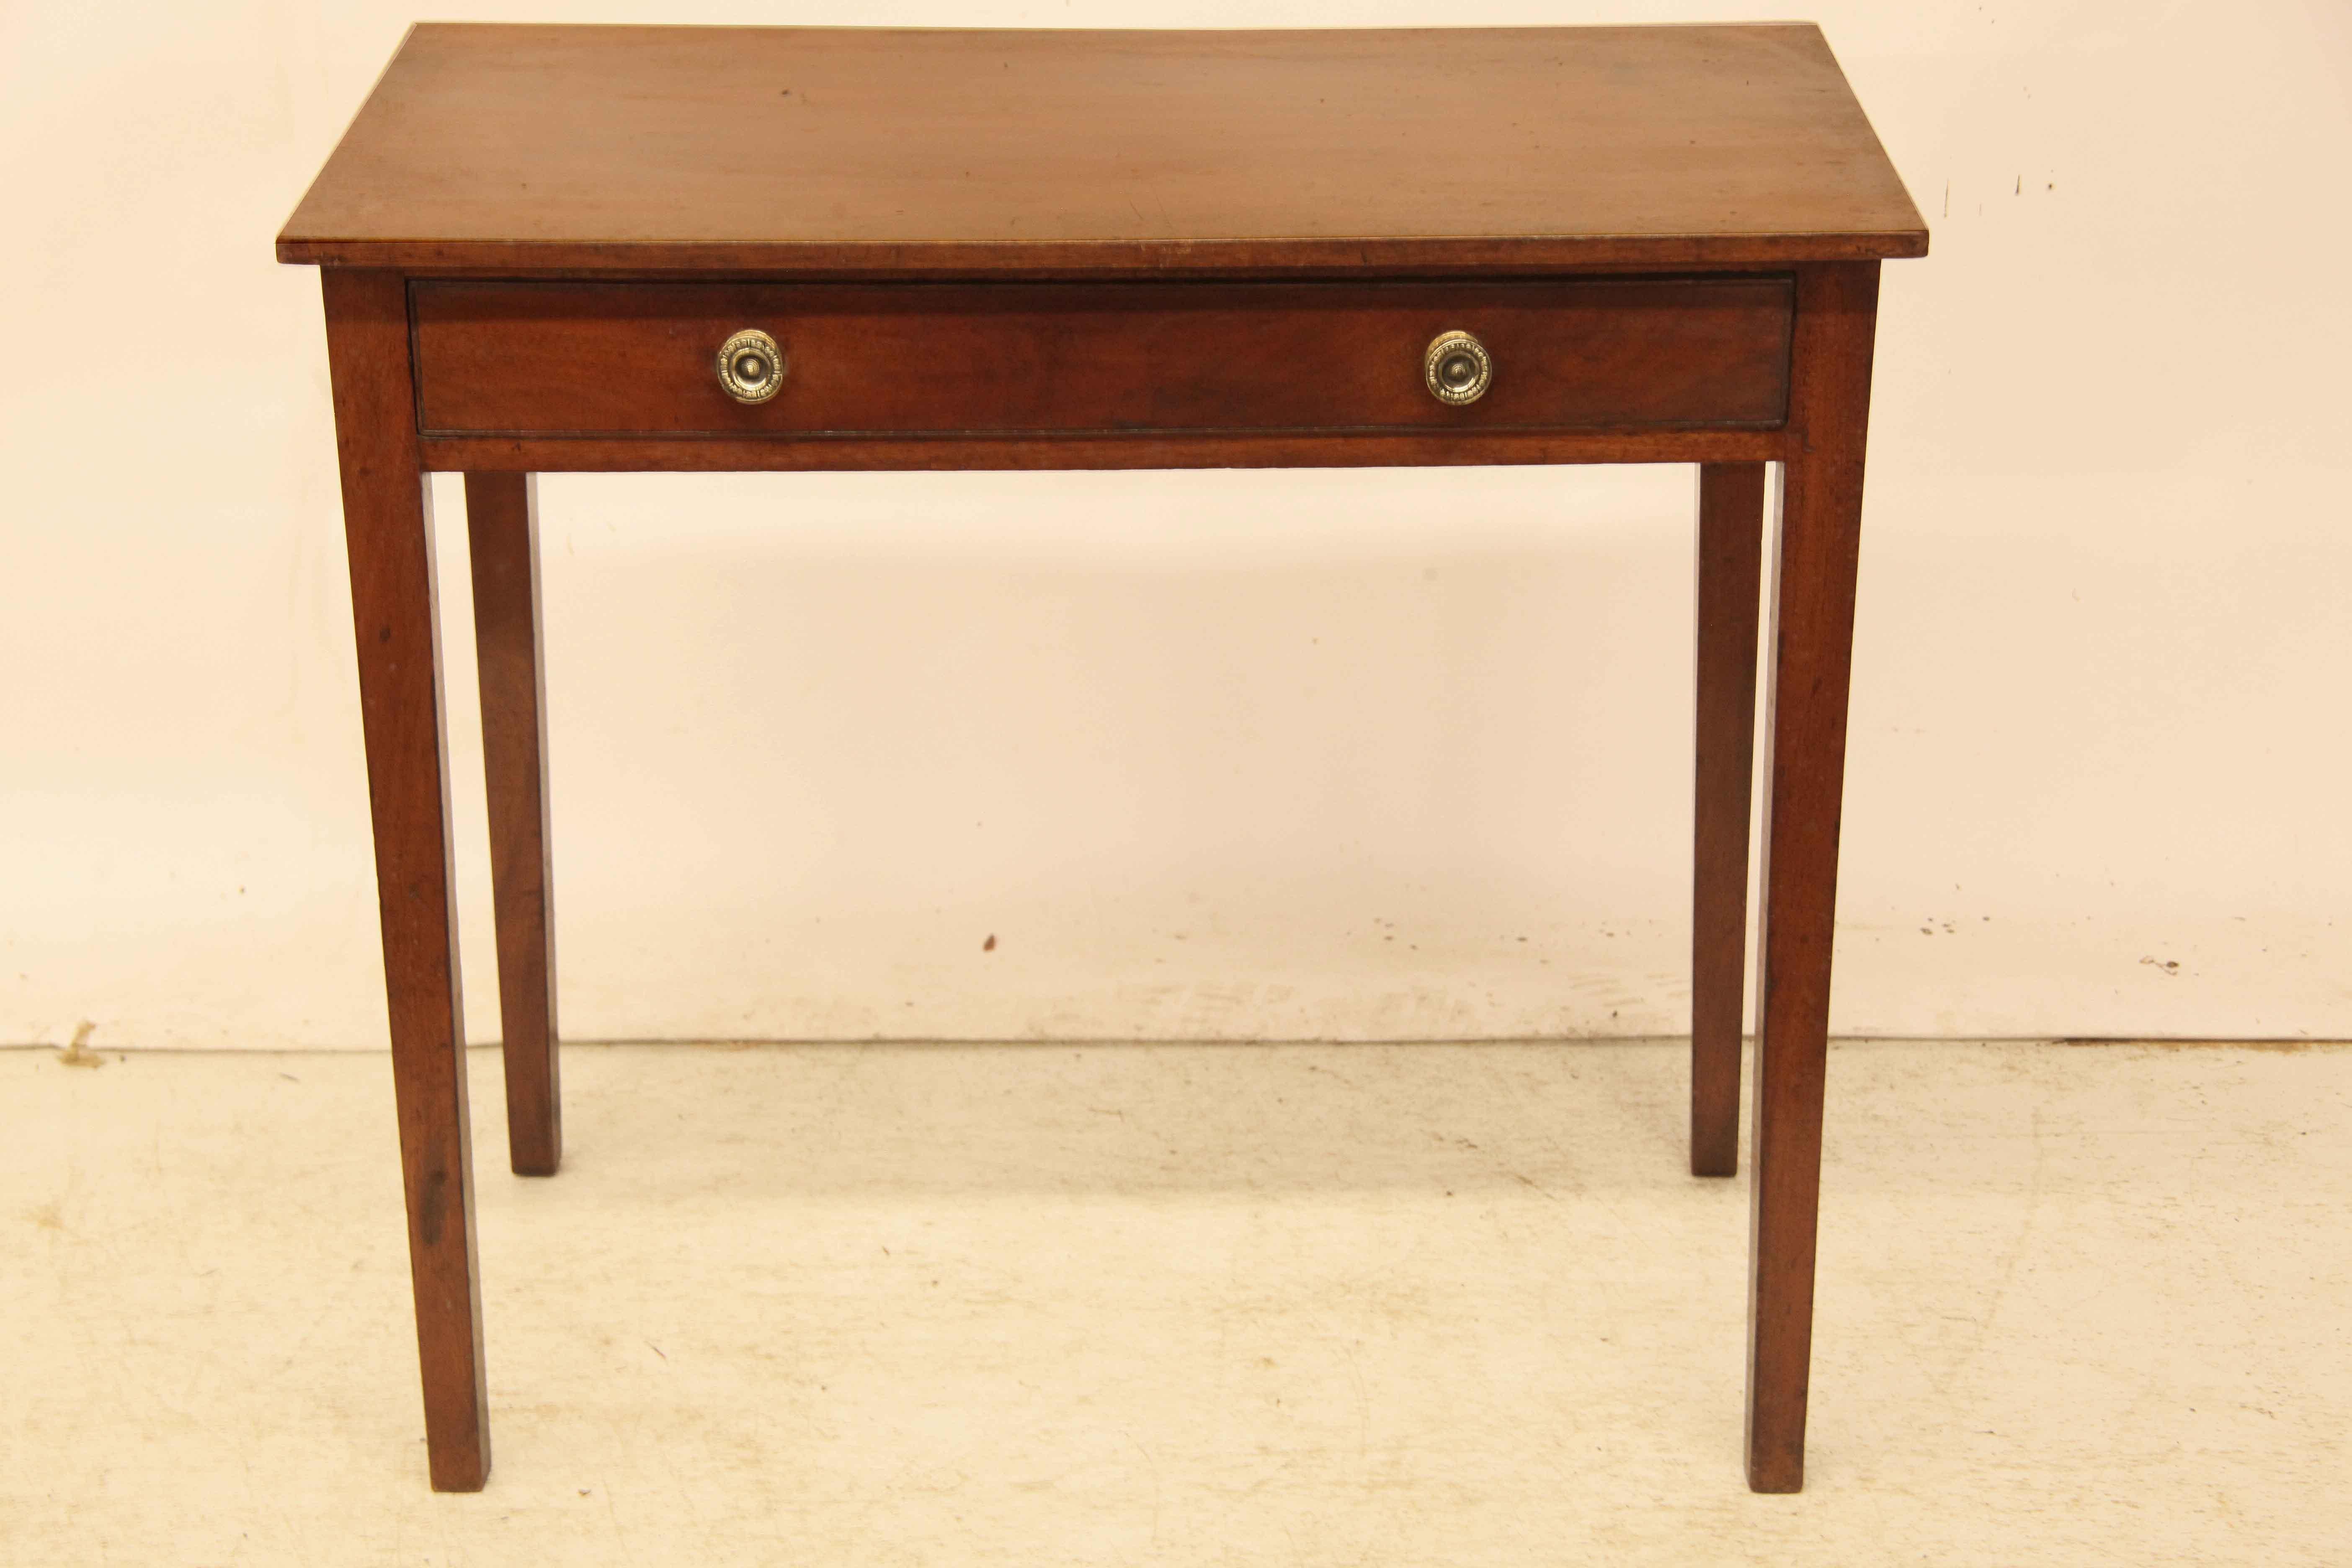 English Hepplewhite one drawer table has beautiful color and patina throughout,  single drawer with incised line molding retains the original brass knobs,  the secondary wood is pine;  the slender square legs are nicely tapered .  With a floor to